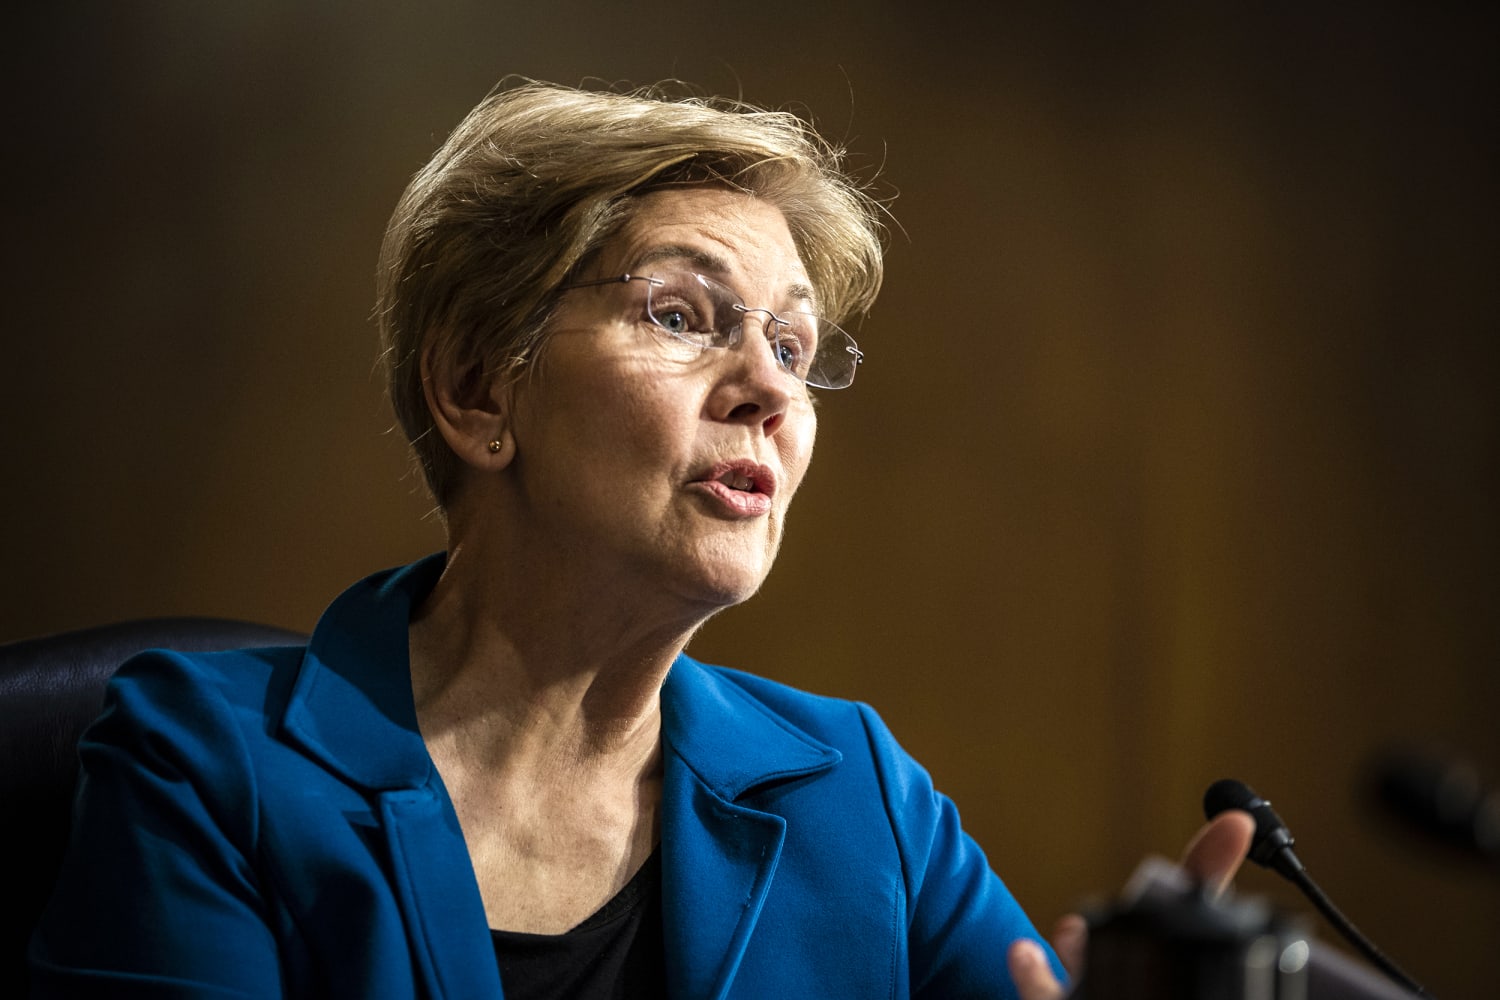 Elizabeth Warren says Jerome Powell has ‘failed’ as Federal Reserve chair